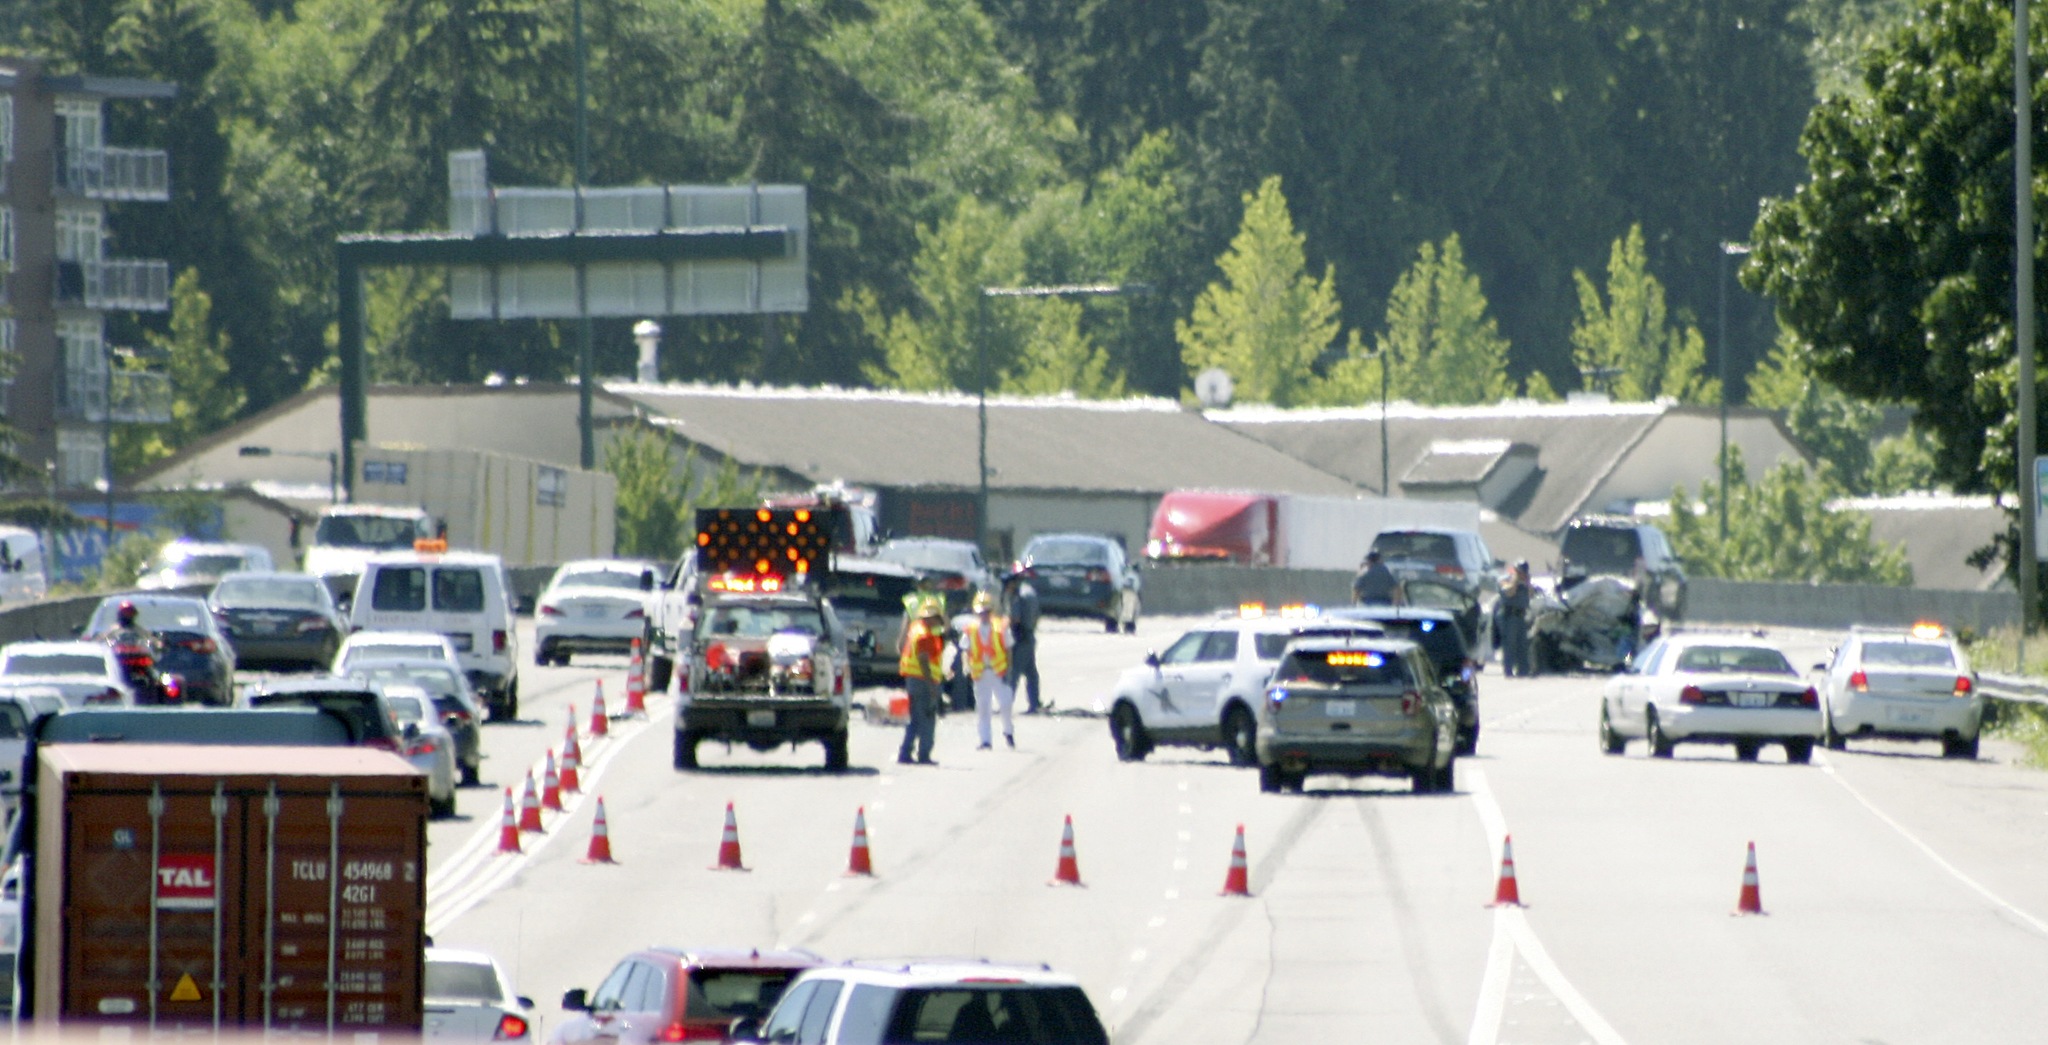 A major injury accident blocked southbond I-405 in Kirkland for two hours on Monday. AARON KUNKLER/Bothell Reporter